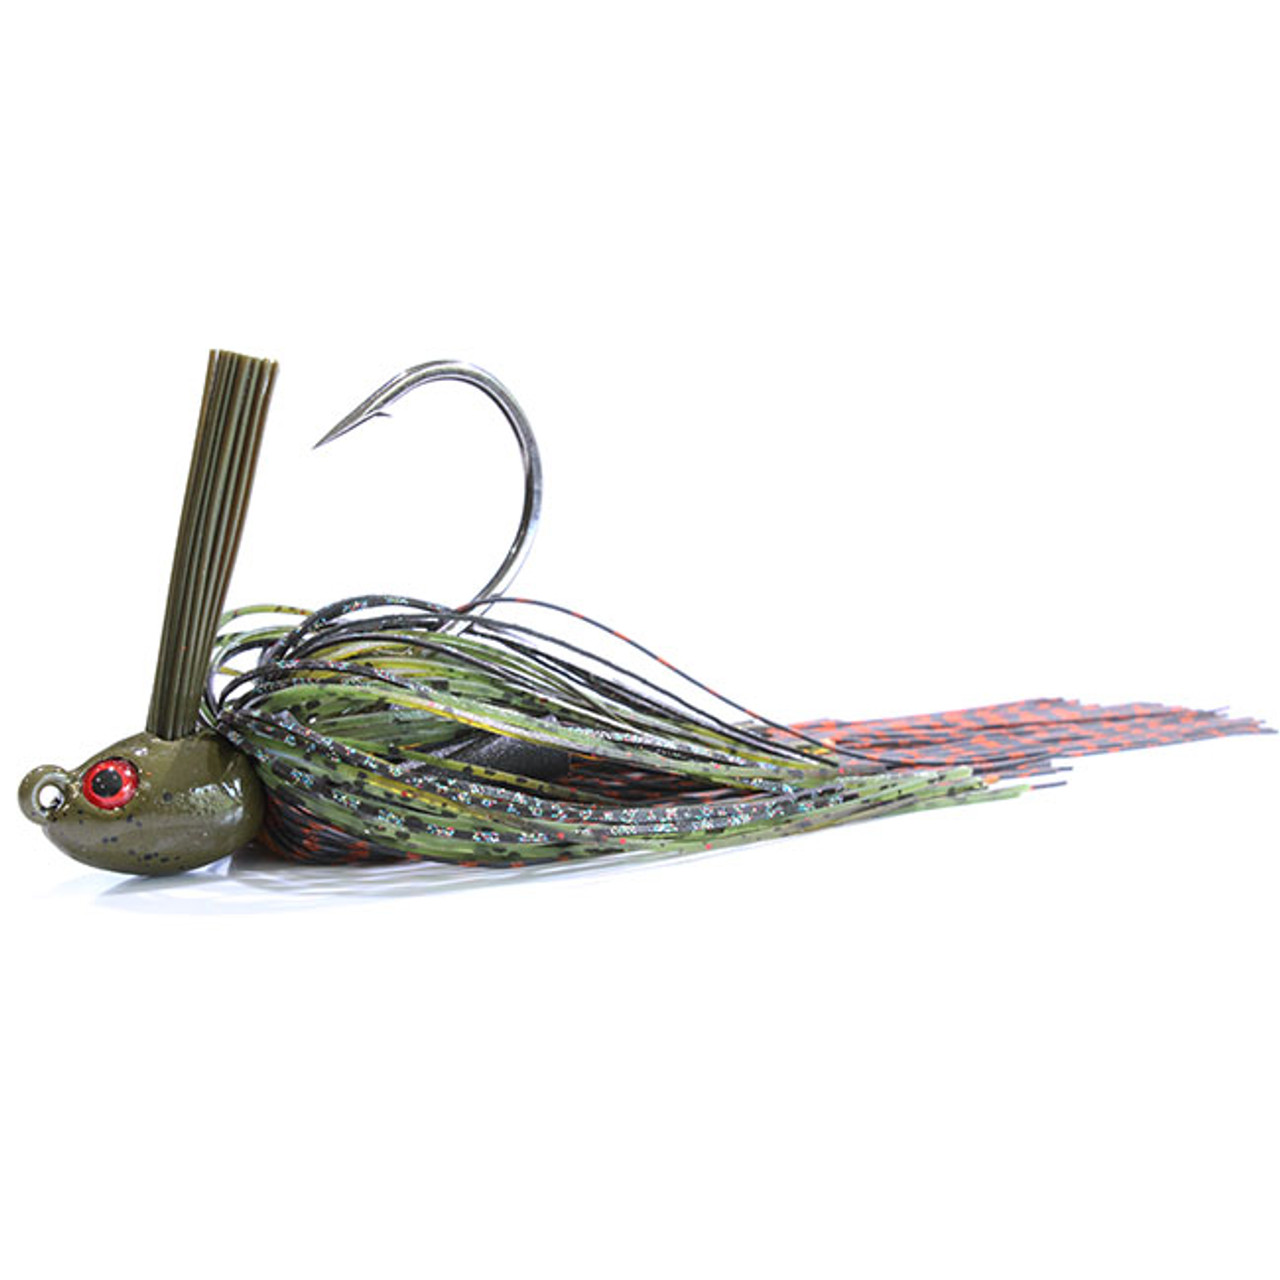 Wicked Lure Black-Green – Wicked Lures